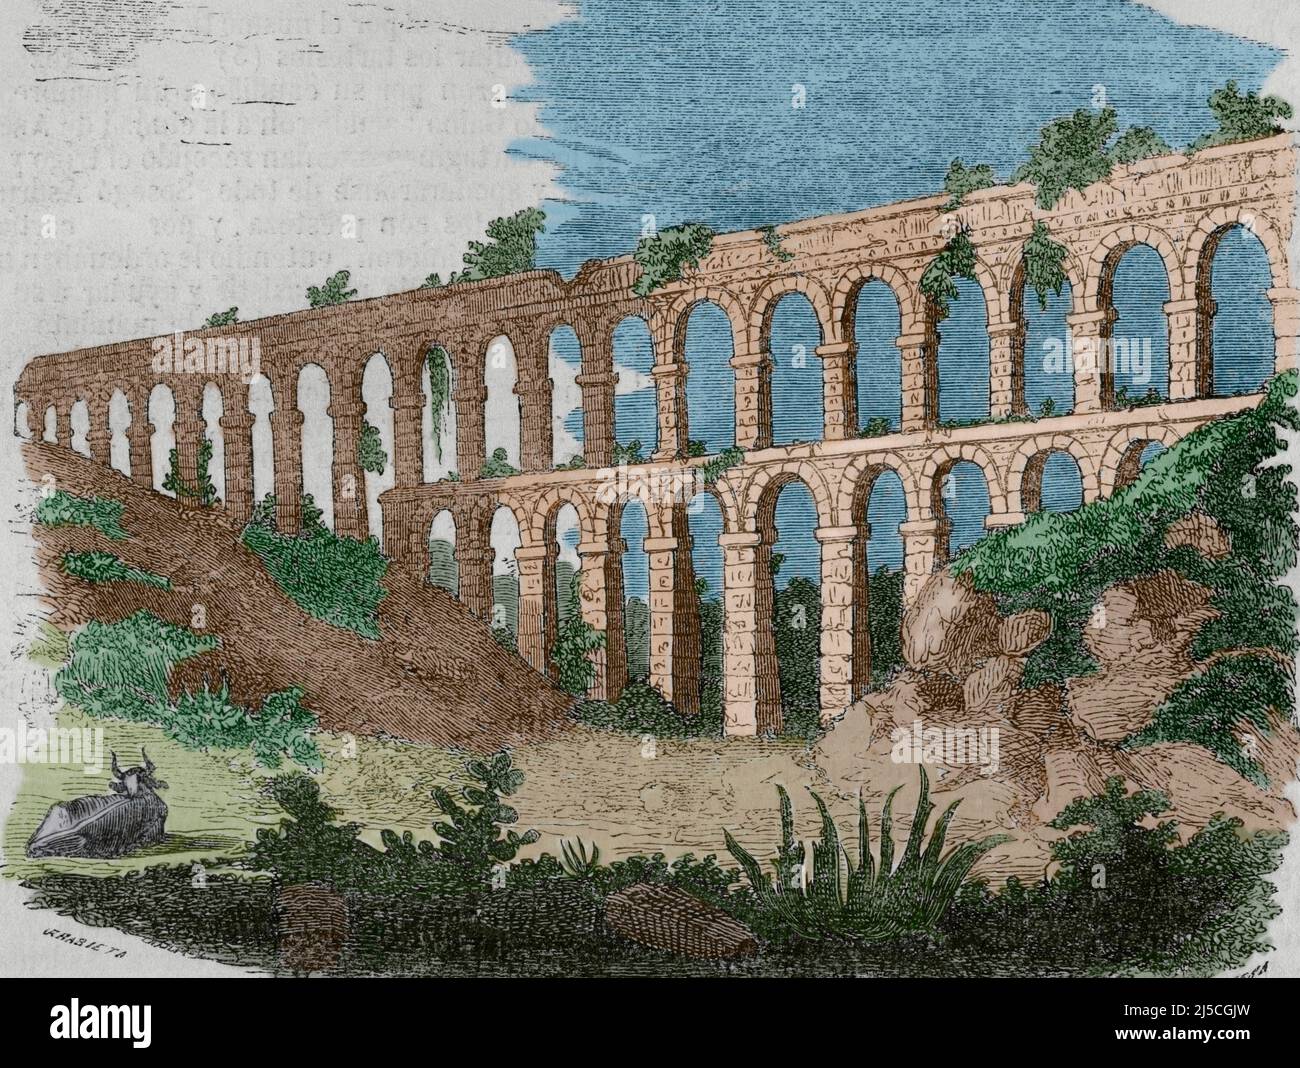 Spain, Catalonia. Aqueduct of Tarragona, also known as the Bridge of Ferreres or Pont del Diable. It was built during the time of Emperor Augustus (63 BC-14 AC) to supply water to the city of Tarragona, from the nearby river Francolí. Illustration by Urrabieta. Engraving by Cibera. Later colouration. Historia General de España Father Mariana. Madrid, 1852. Stock Photo